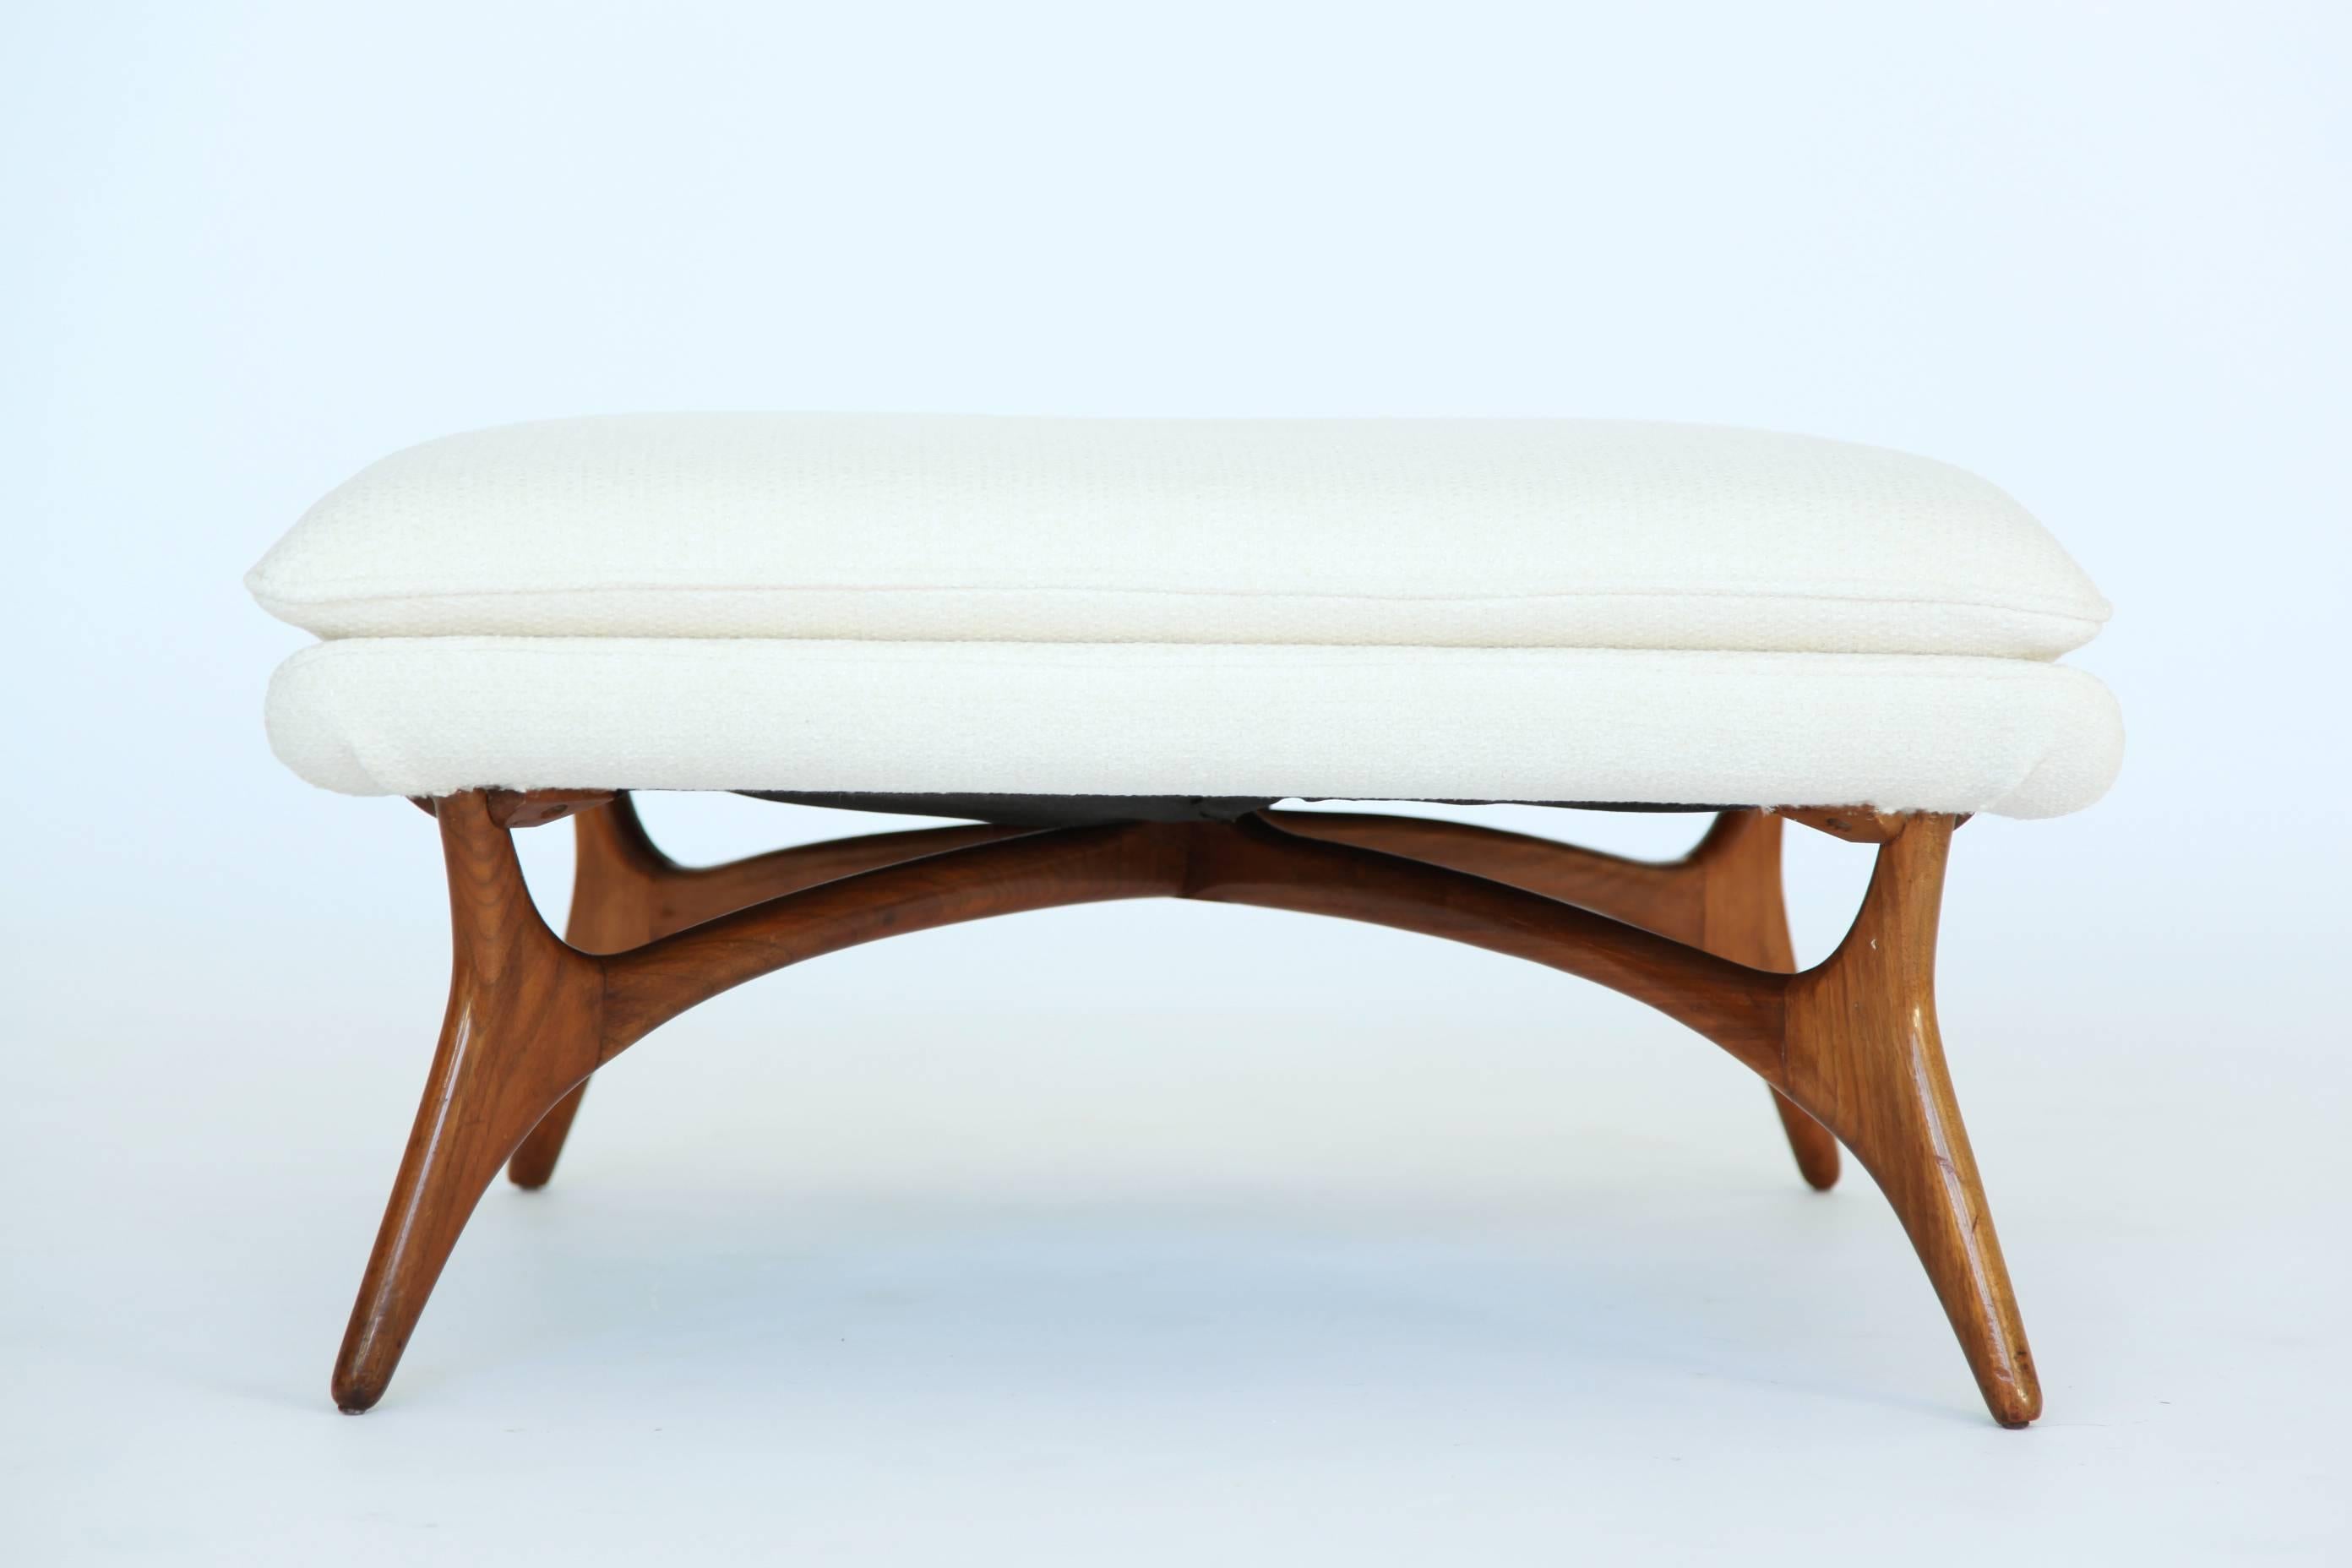 Kagan for Grosfeld House rare ottoman/poof.
Sculpted solid walnut splayed legs, oiled hand rubbed finish, reupholstered with great plains ivory bouclé fabric.
  